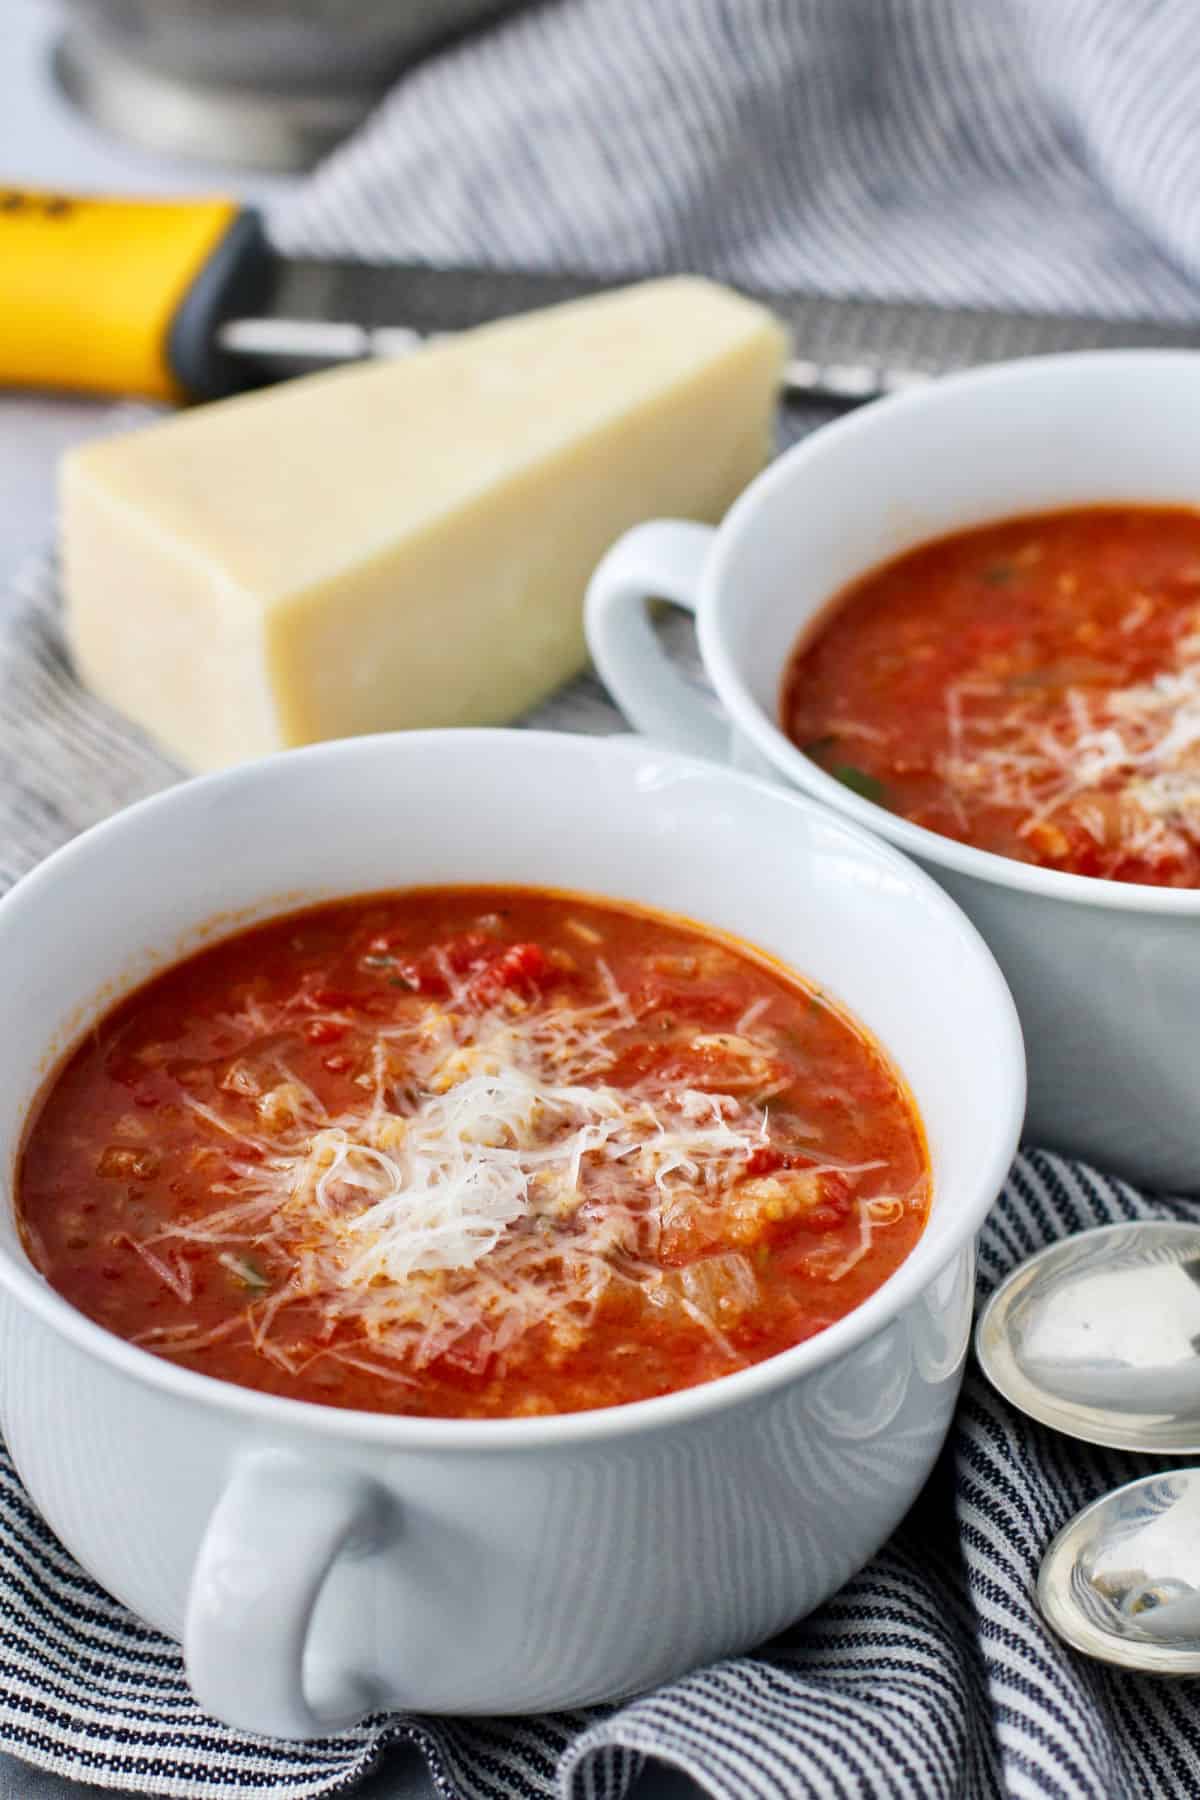 Pappa al Pomodoro (Tomato and Bread Soup) topped with cheese.